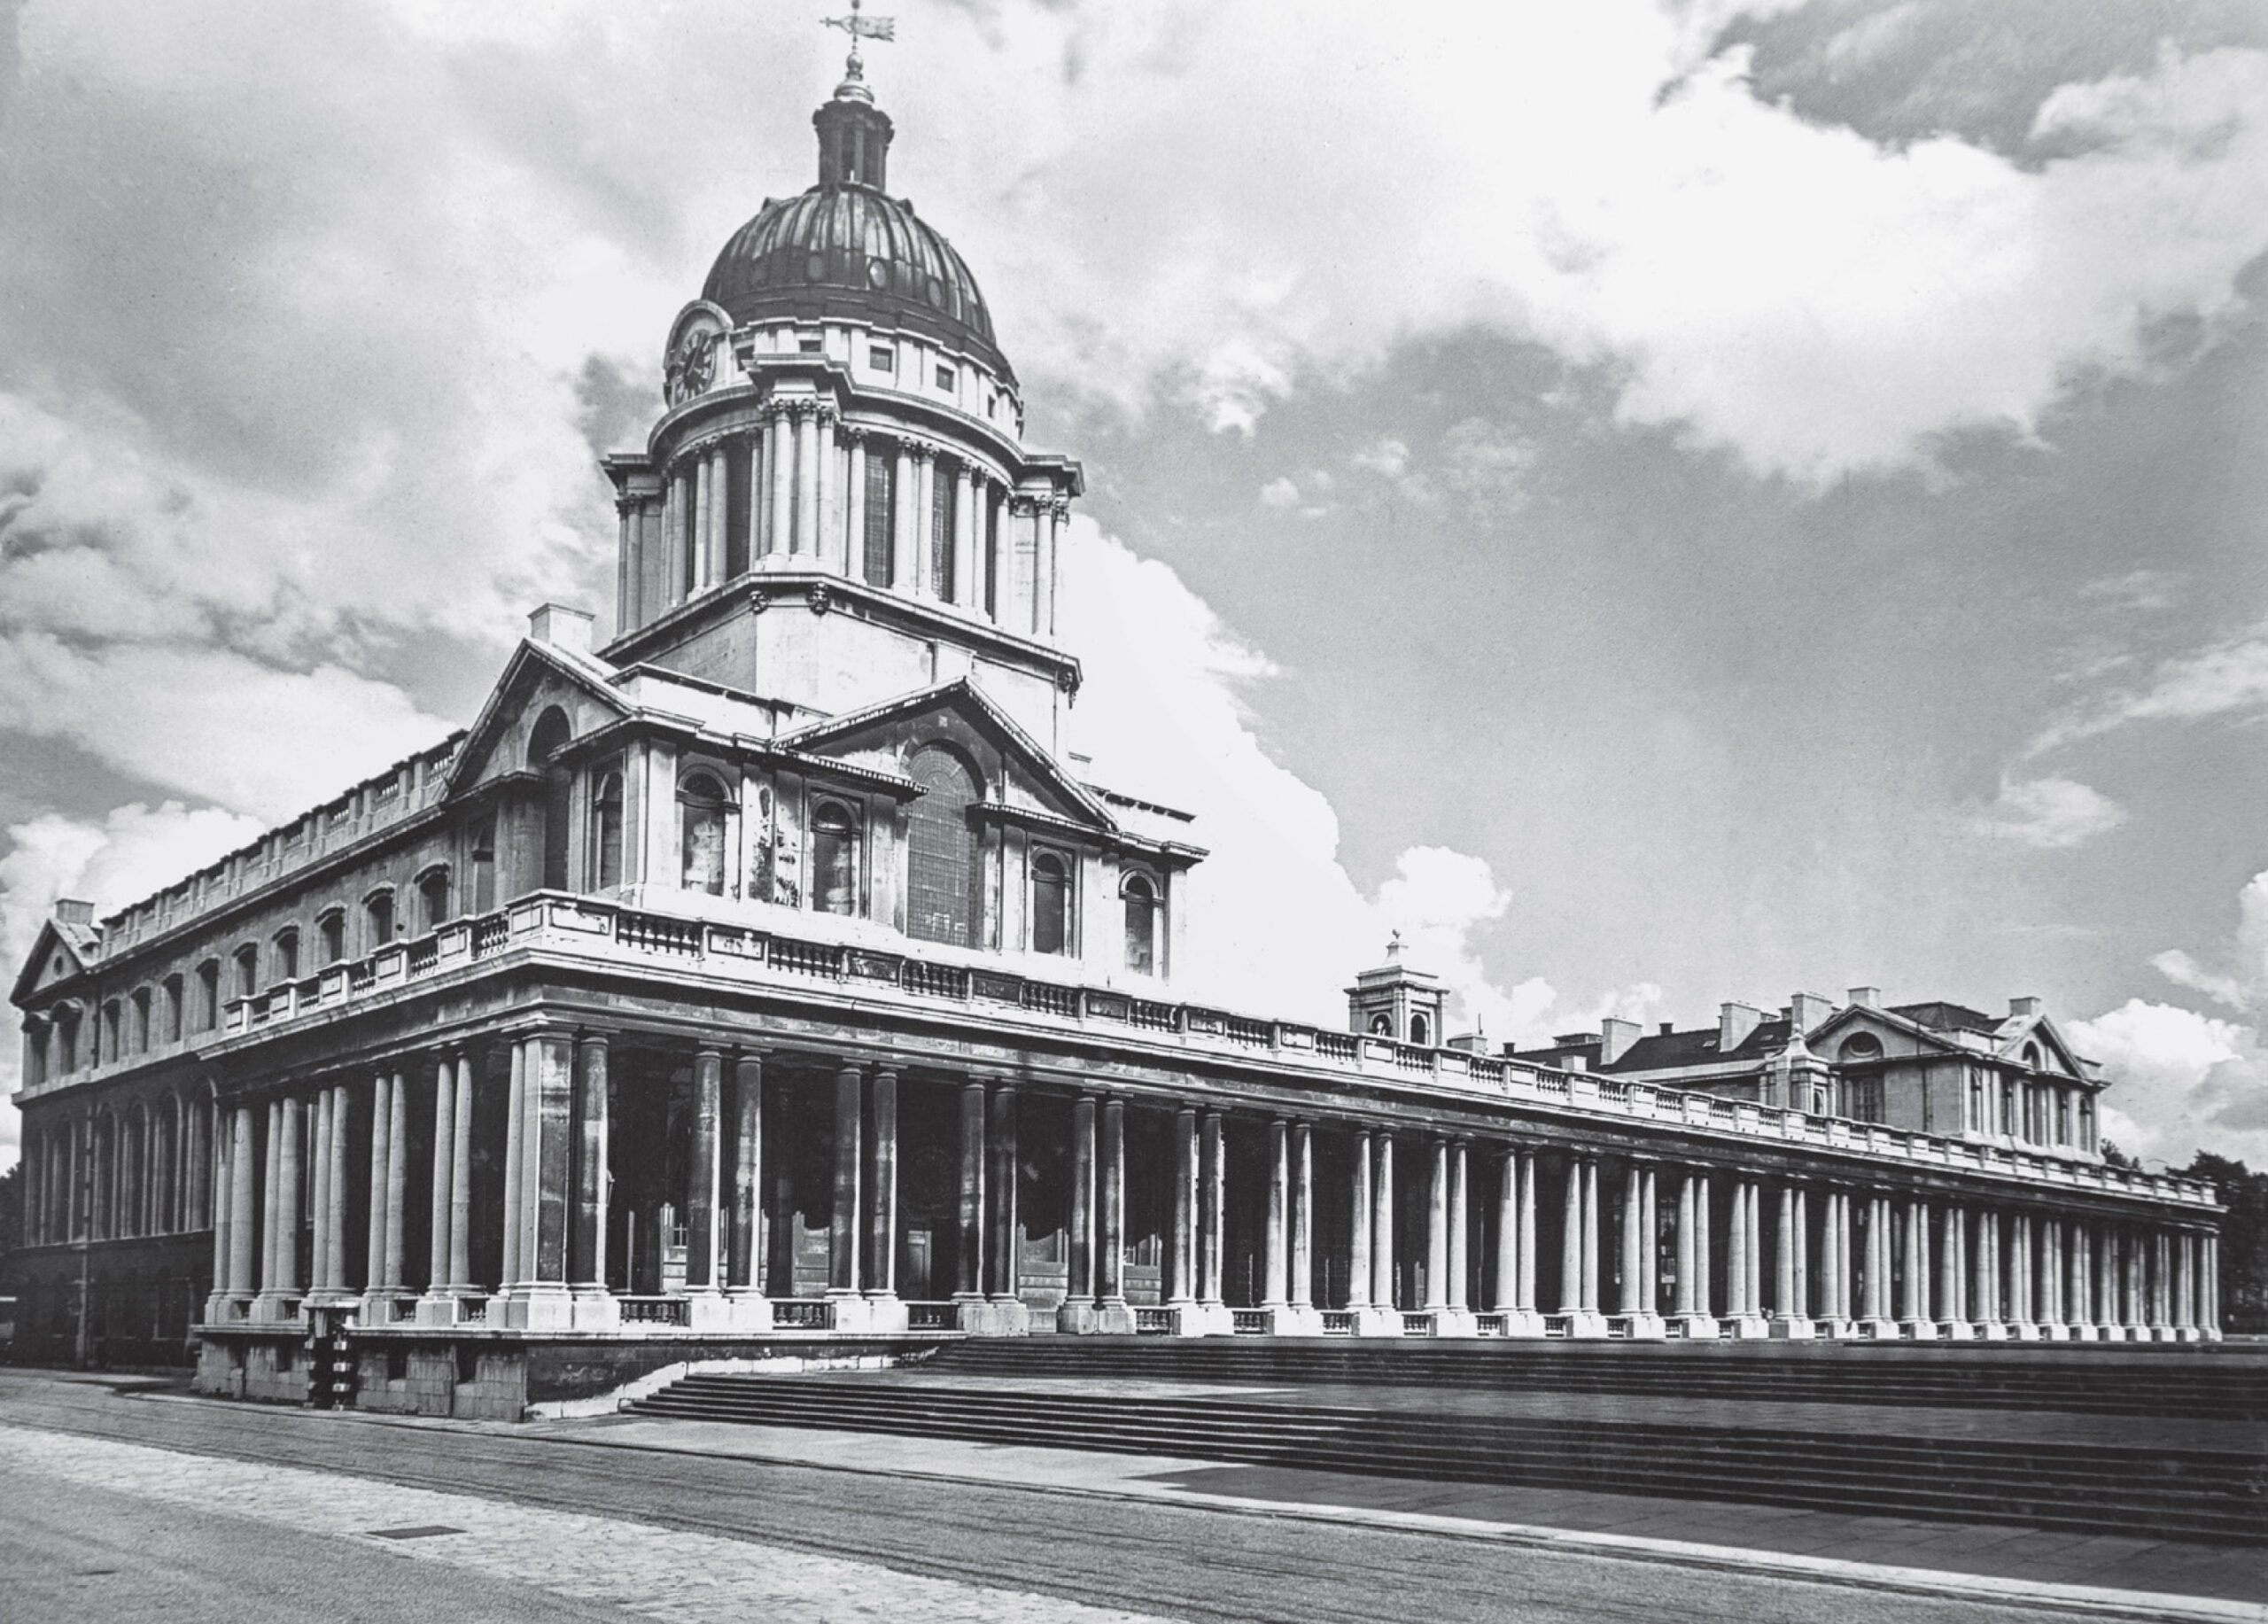 Royal Naval College and Queen’s House, Greenwich, London